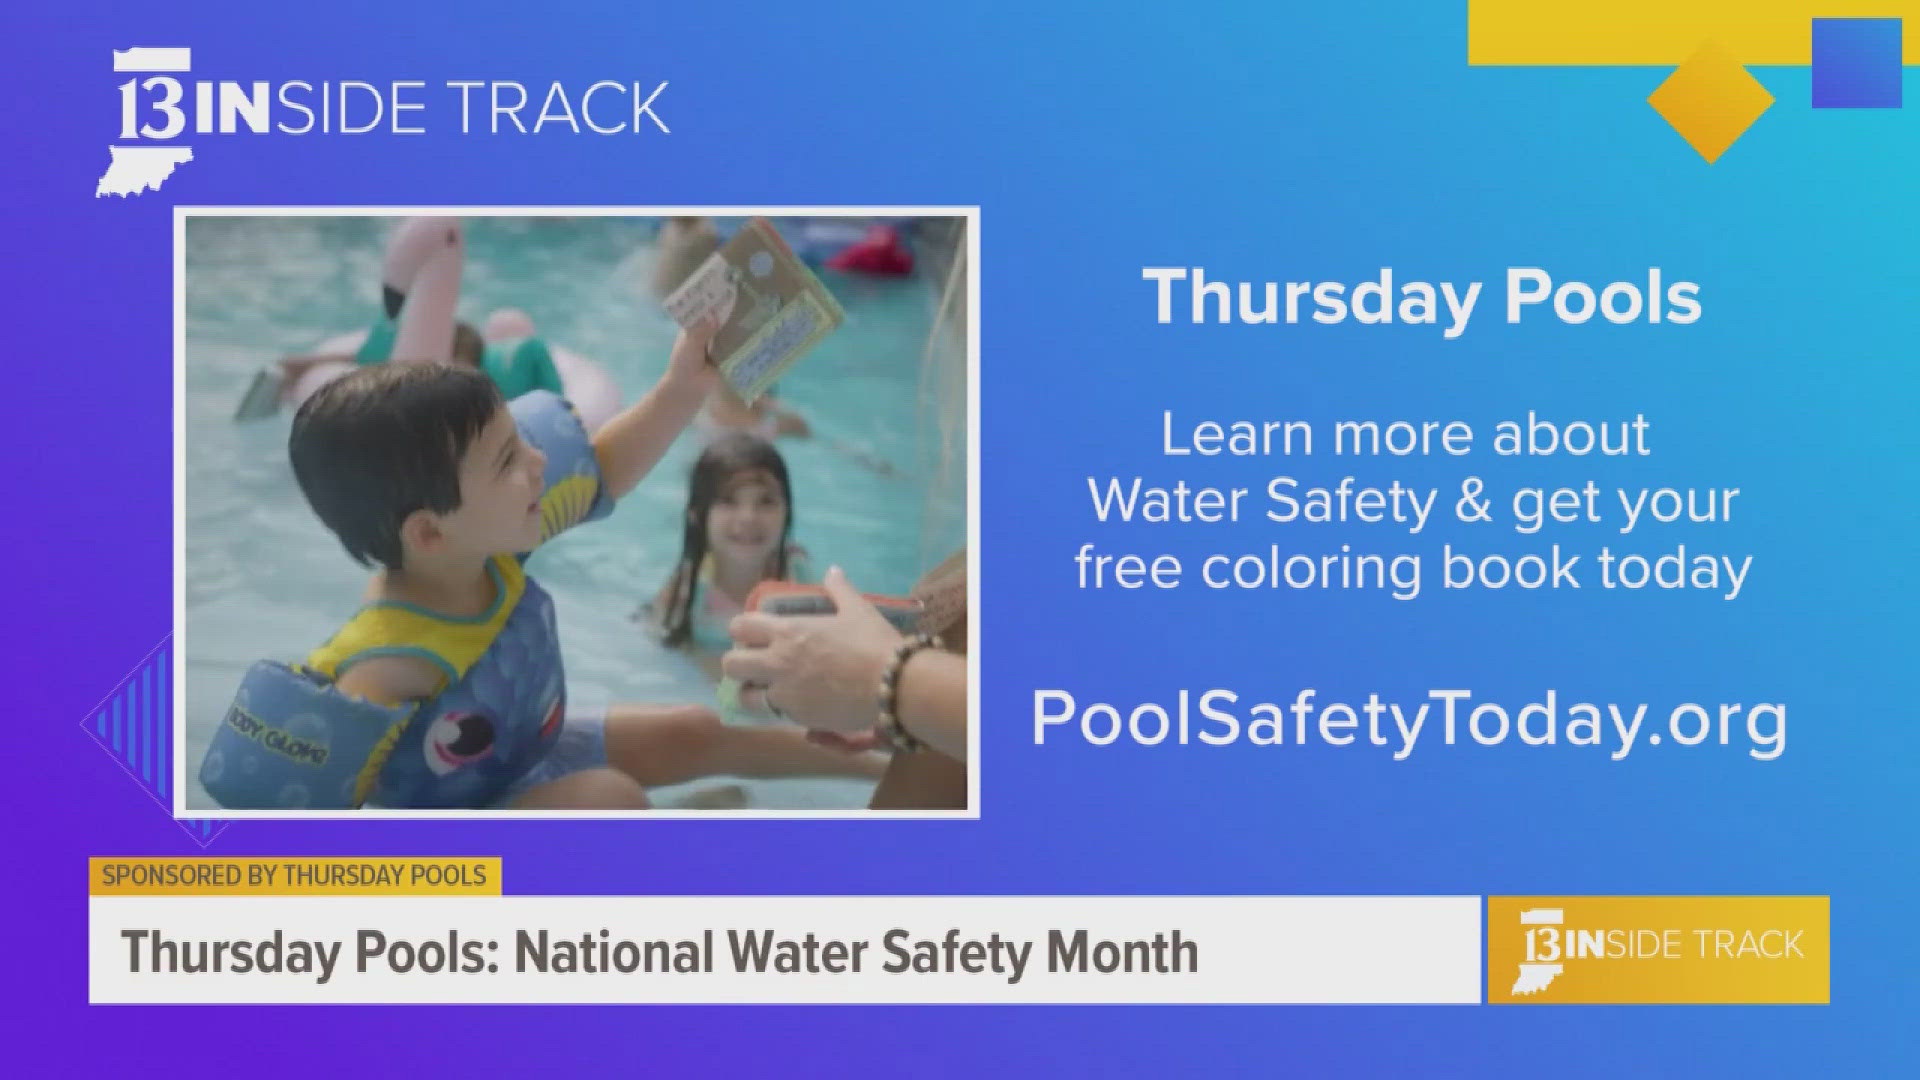 Thursday Pools emphasizes the importance of water safety through partnerships and innovative technology.